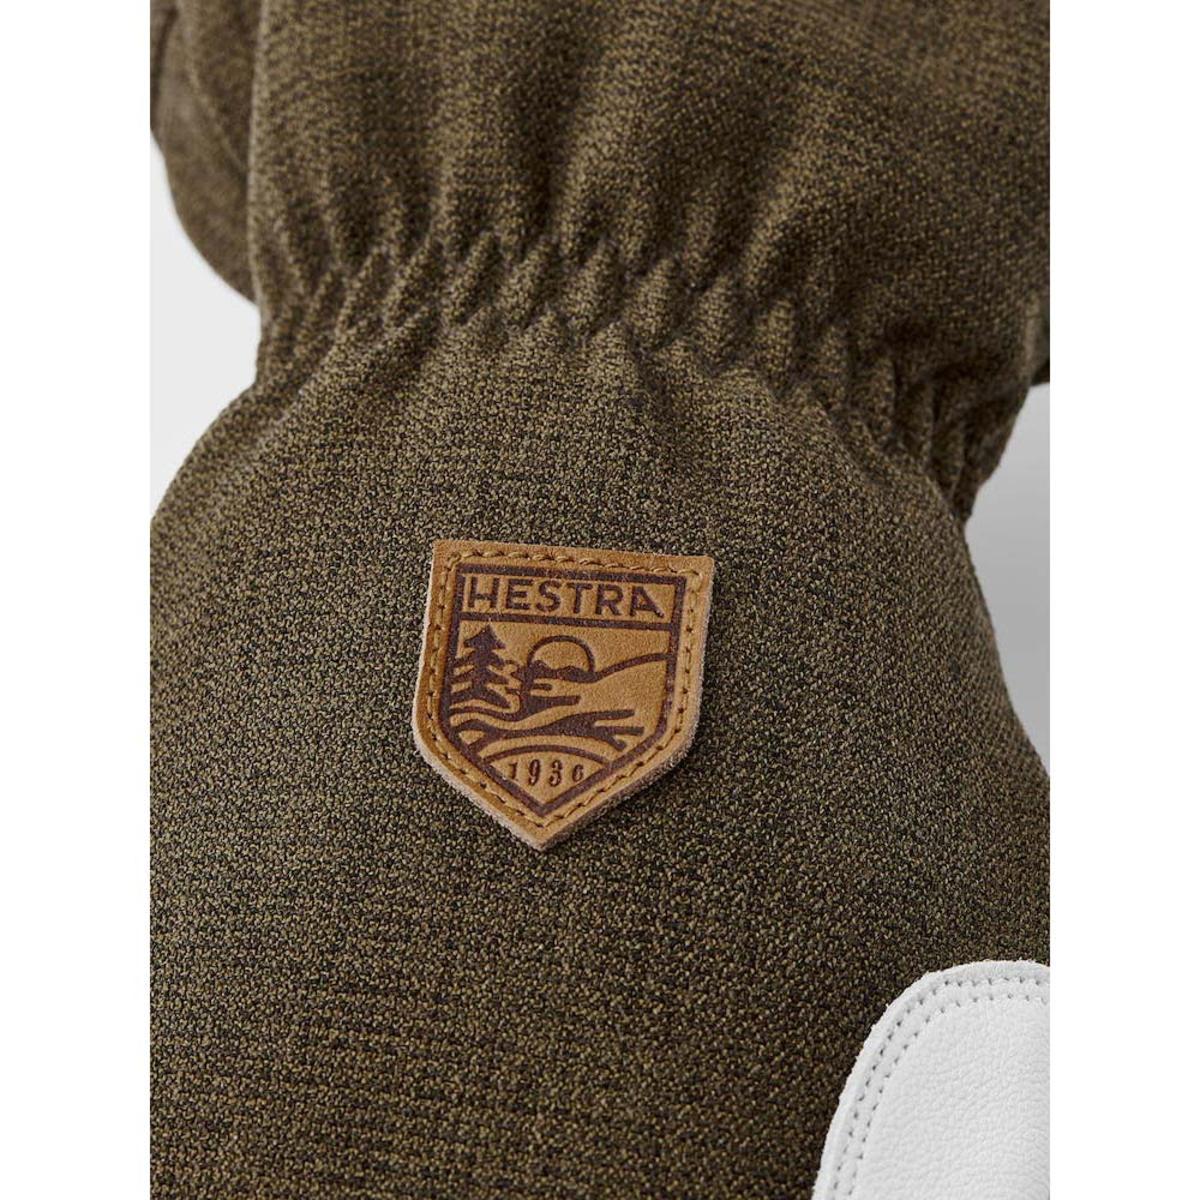 Hestra Army Leather Patrol Gauntlet Mitts